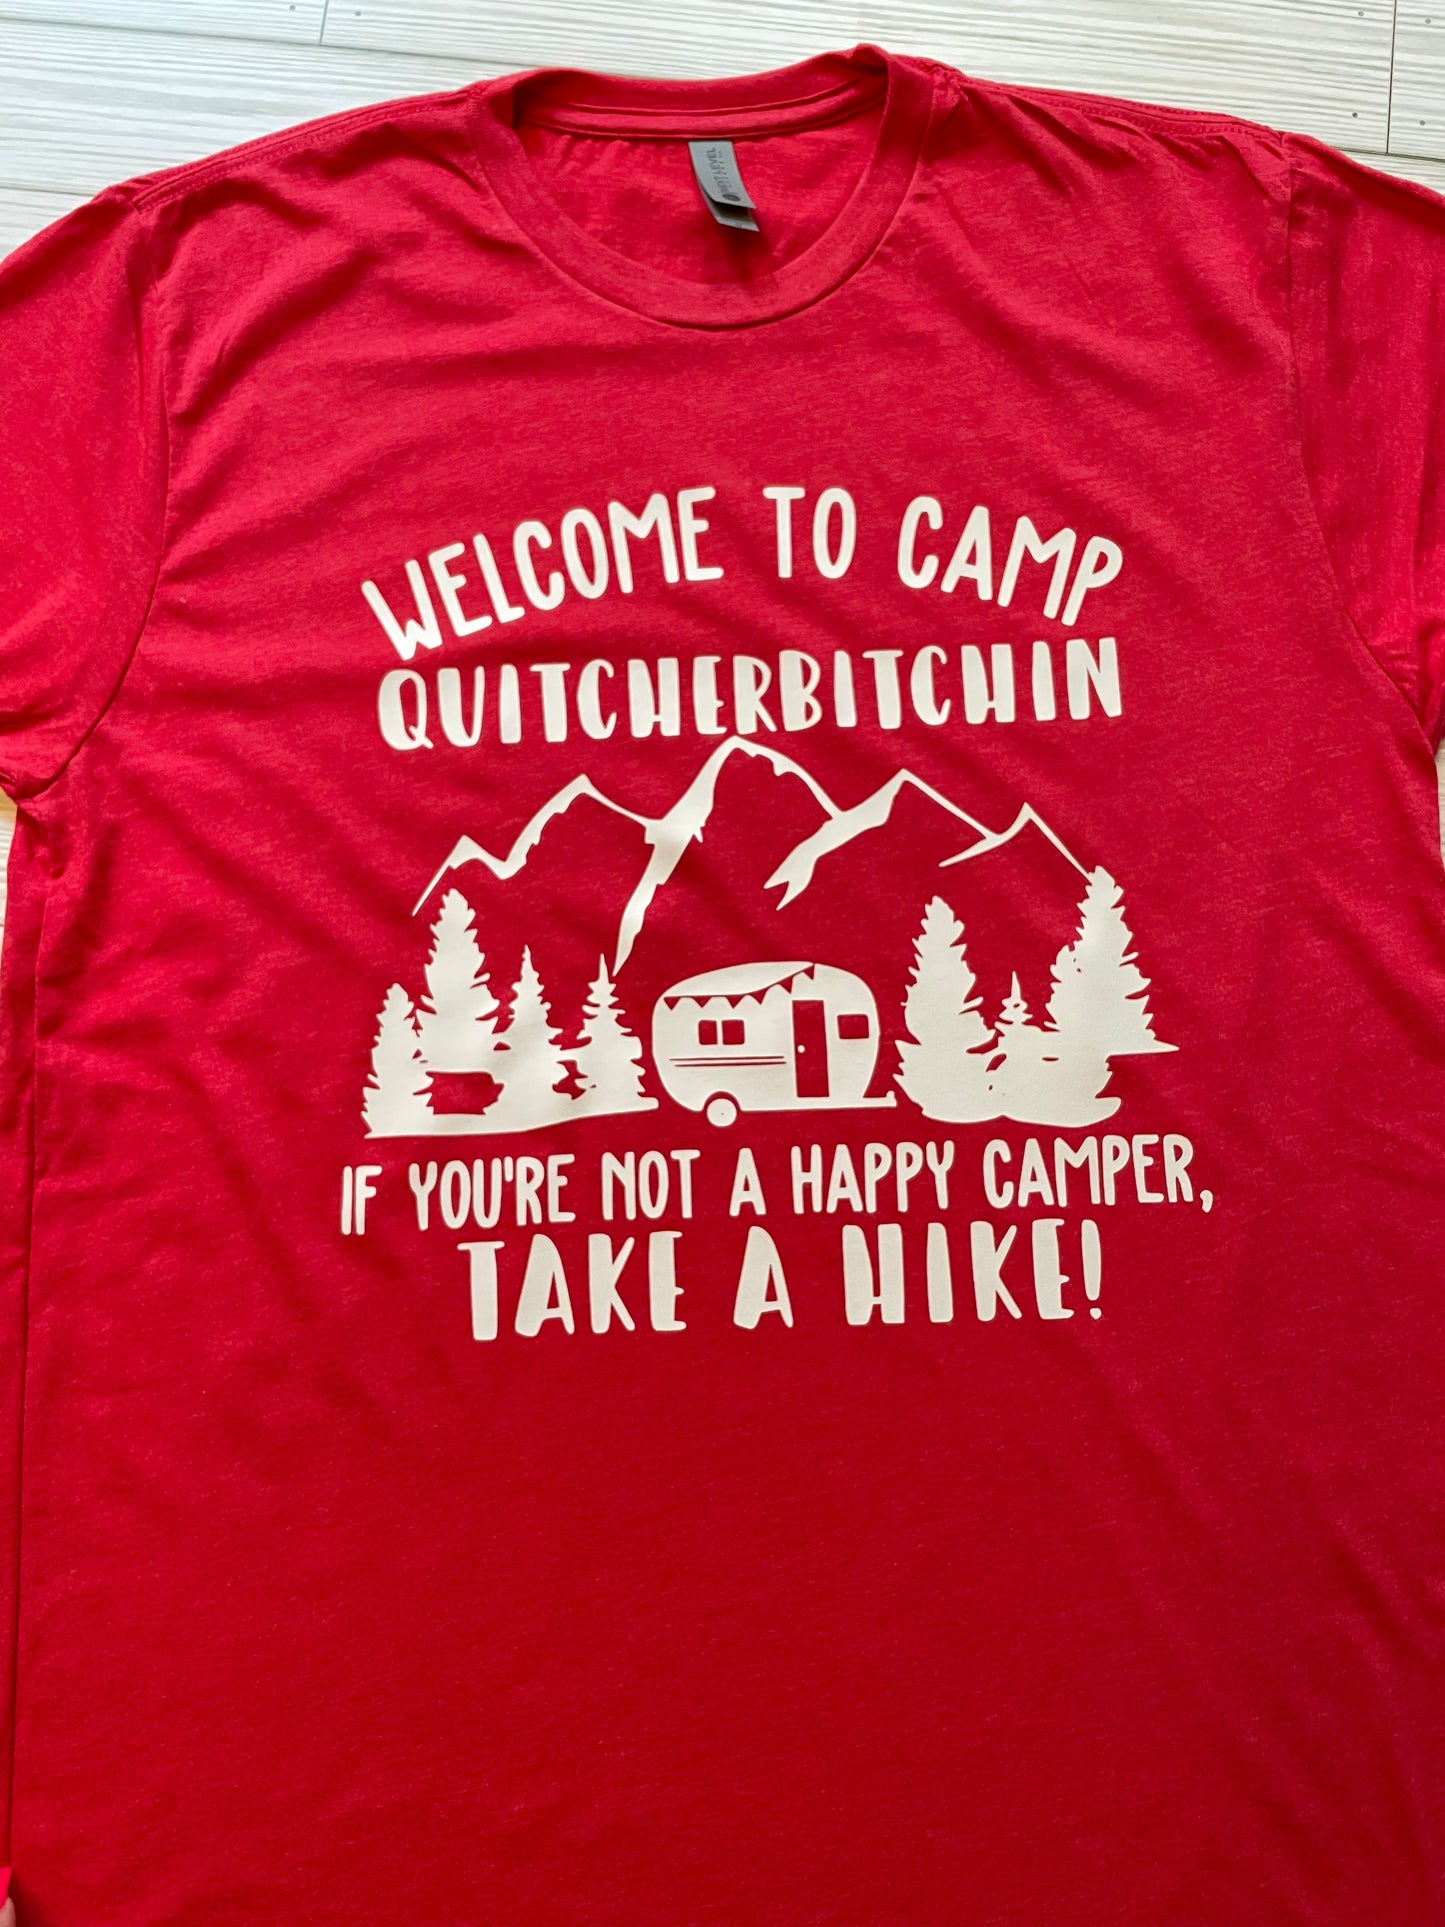 Welcome to Camp….